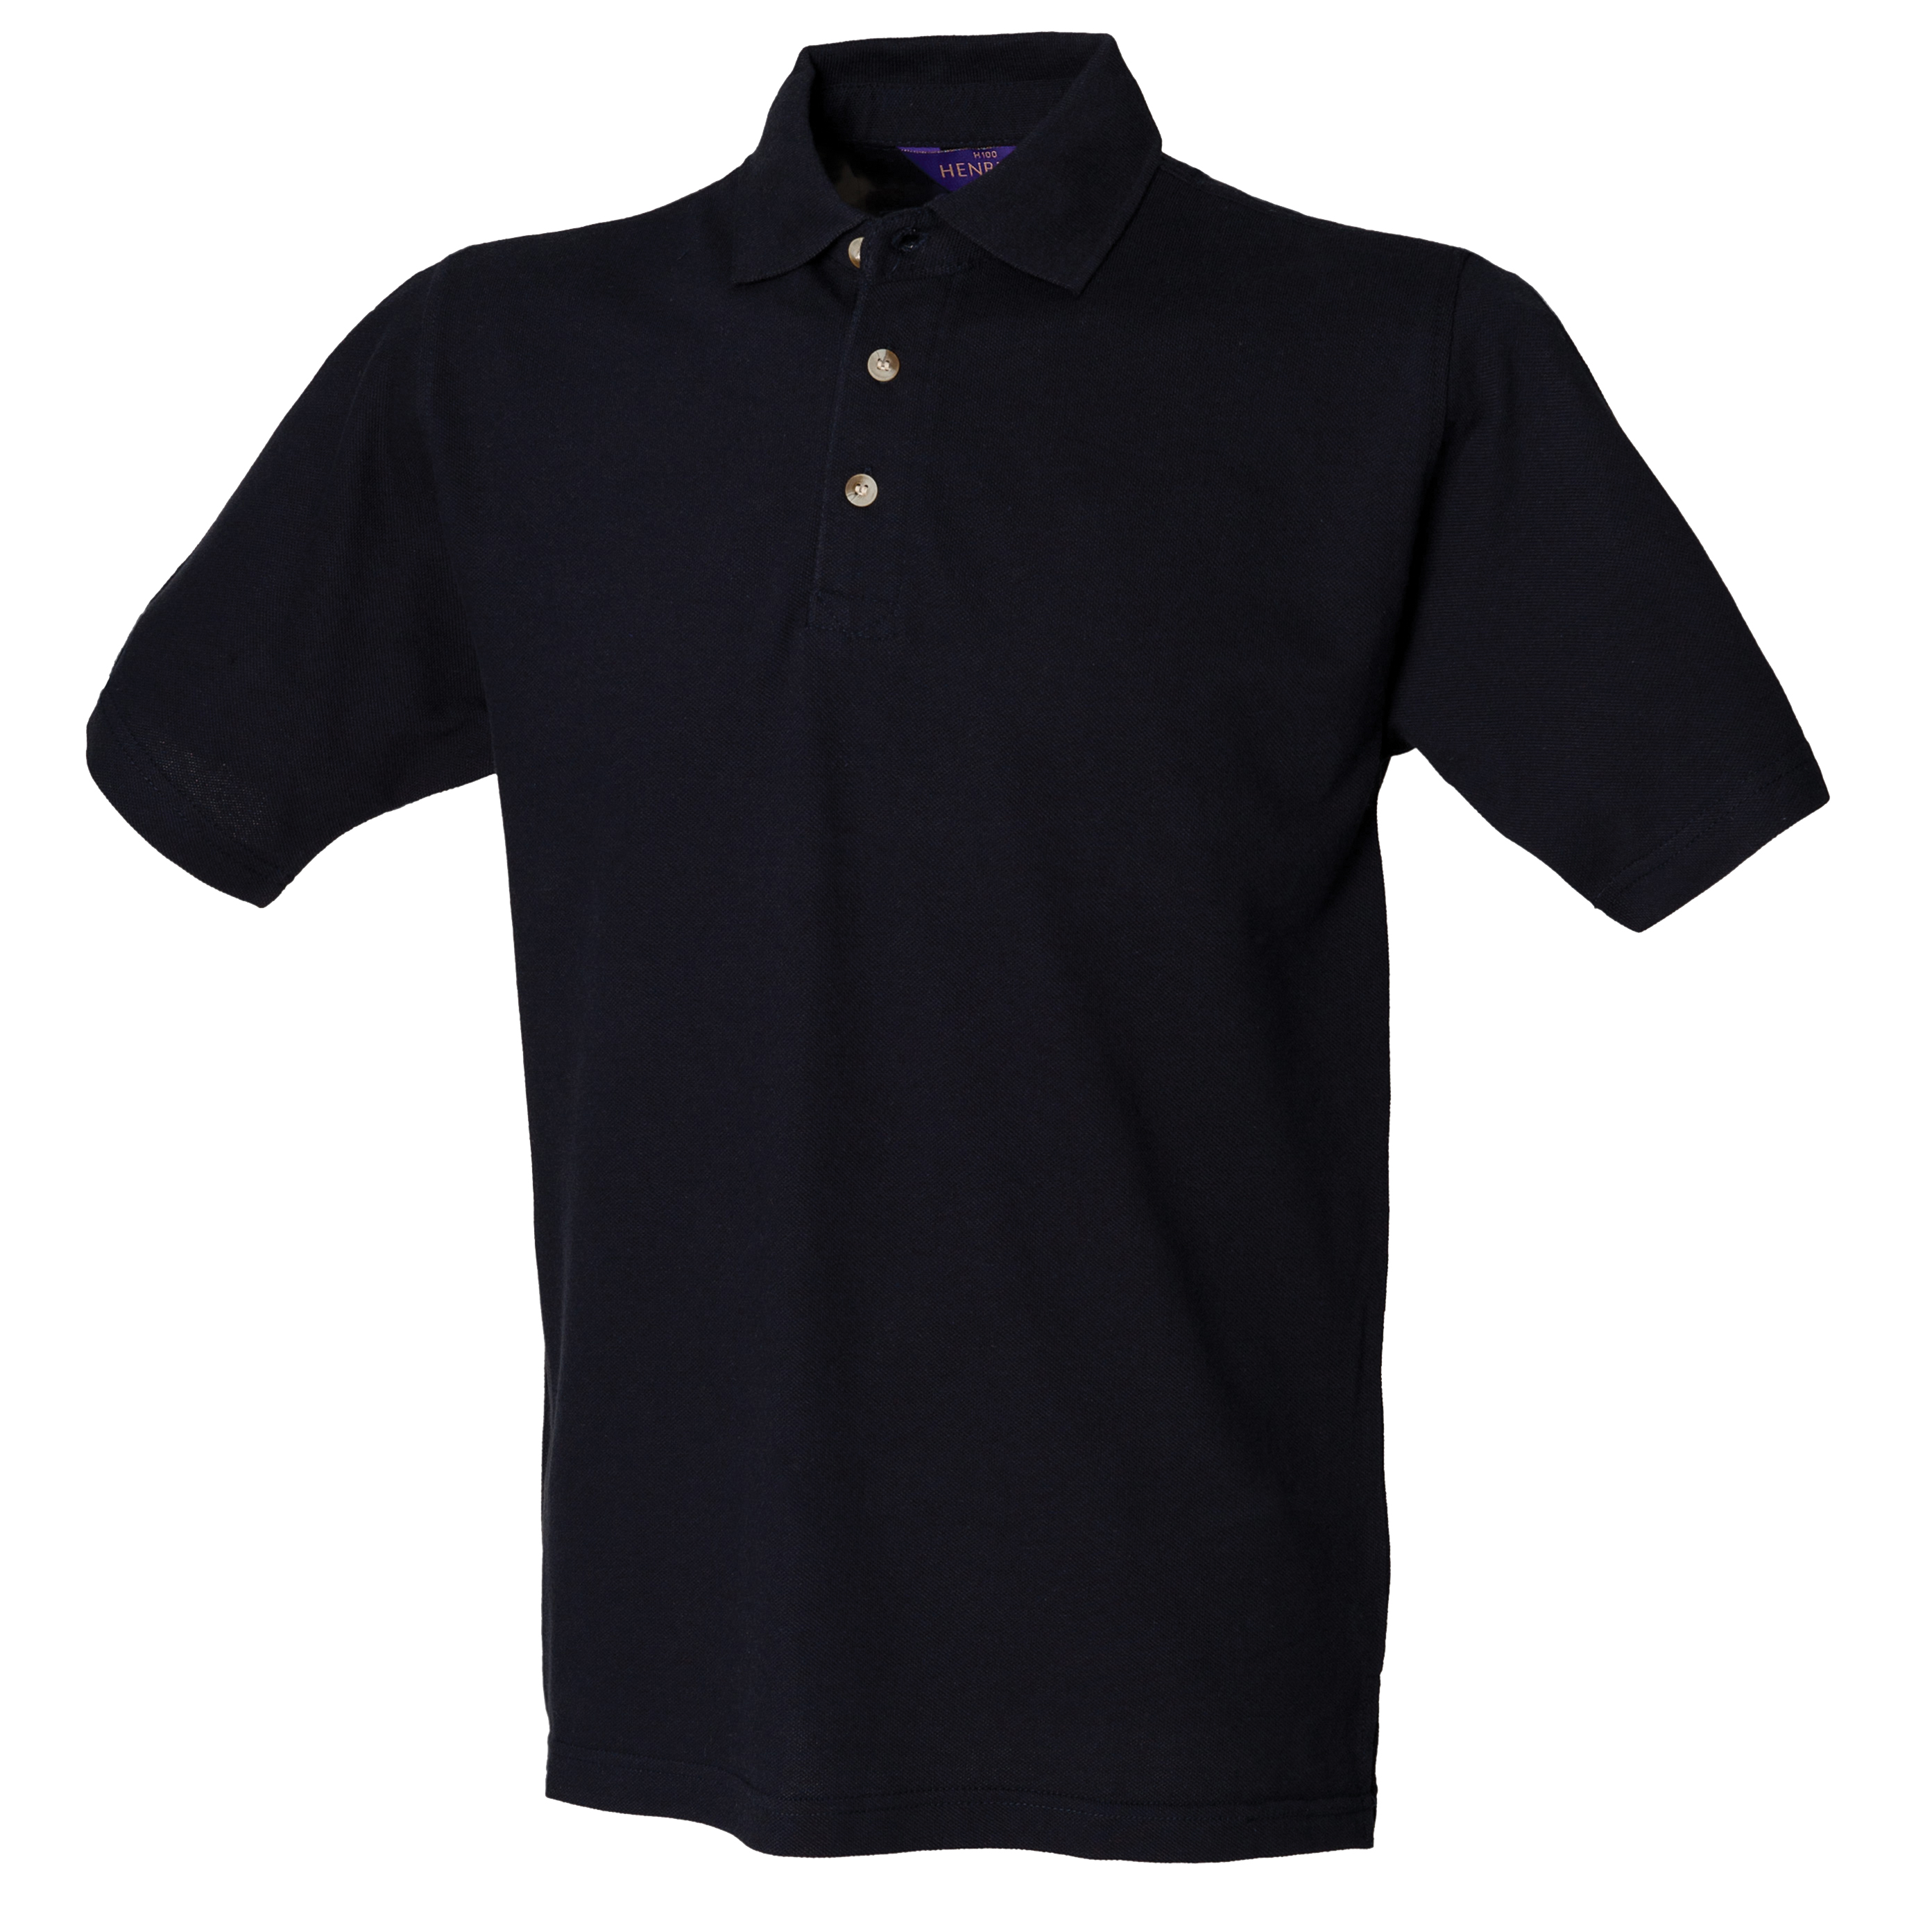 ax-httpswebsystems.s3.amazonaws.comtmp_for_downloadhenbury-classic-cotton-pique-polo-stand-up-navy.jpg